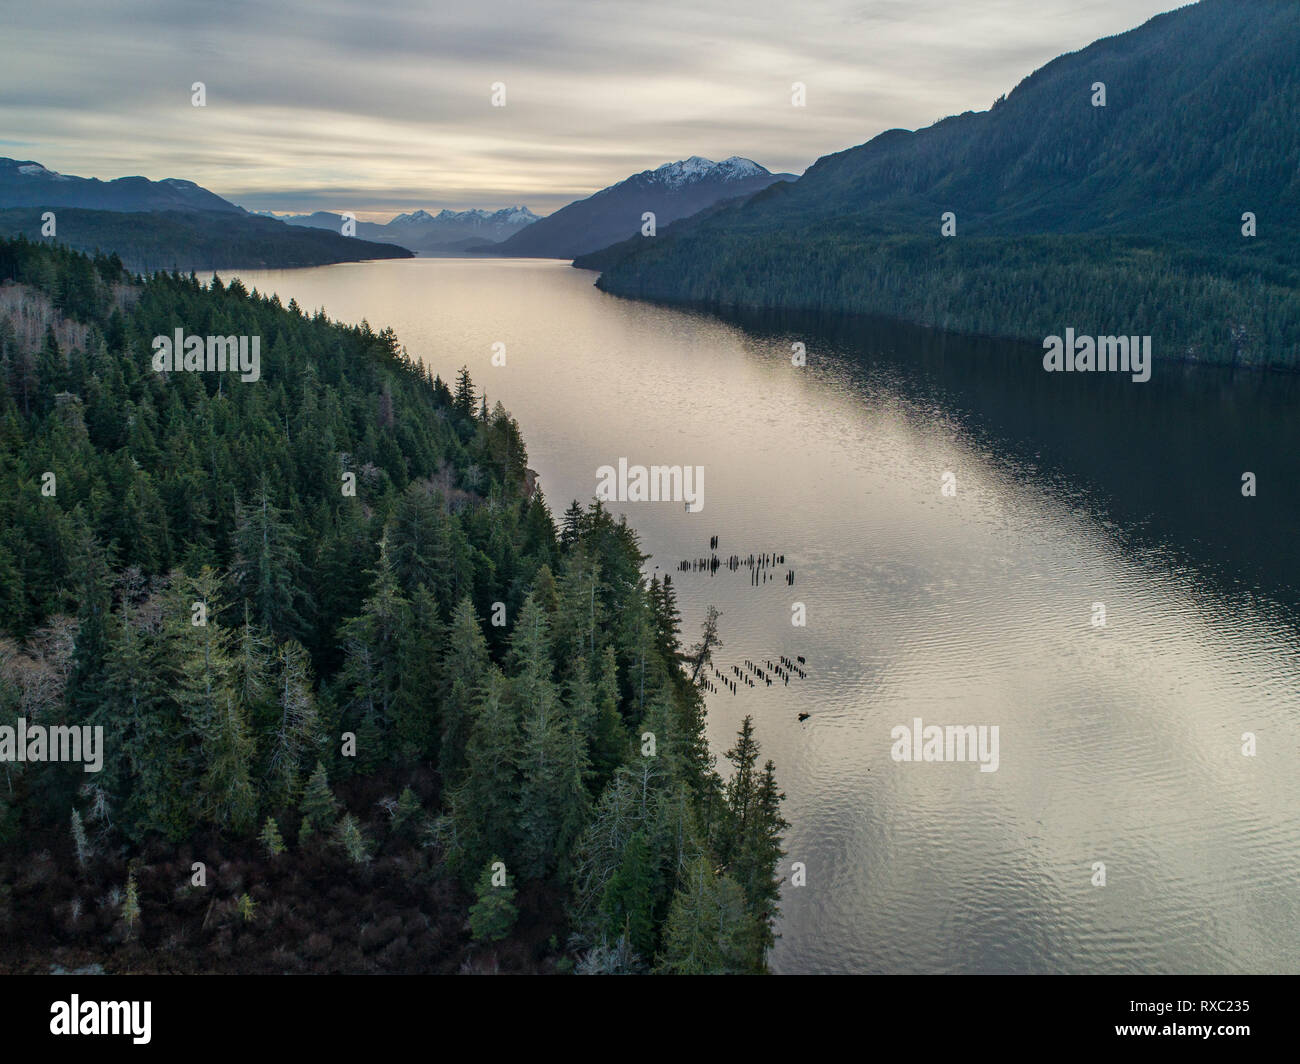 Drone image aerial view of Nimpkish Lake in Nimpkish Valley, northern Vancouver Island, British Columbia, Canada. Stock Photo